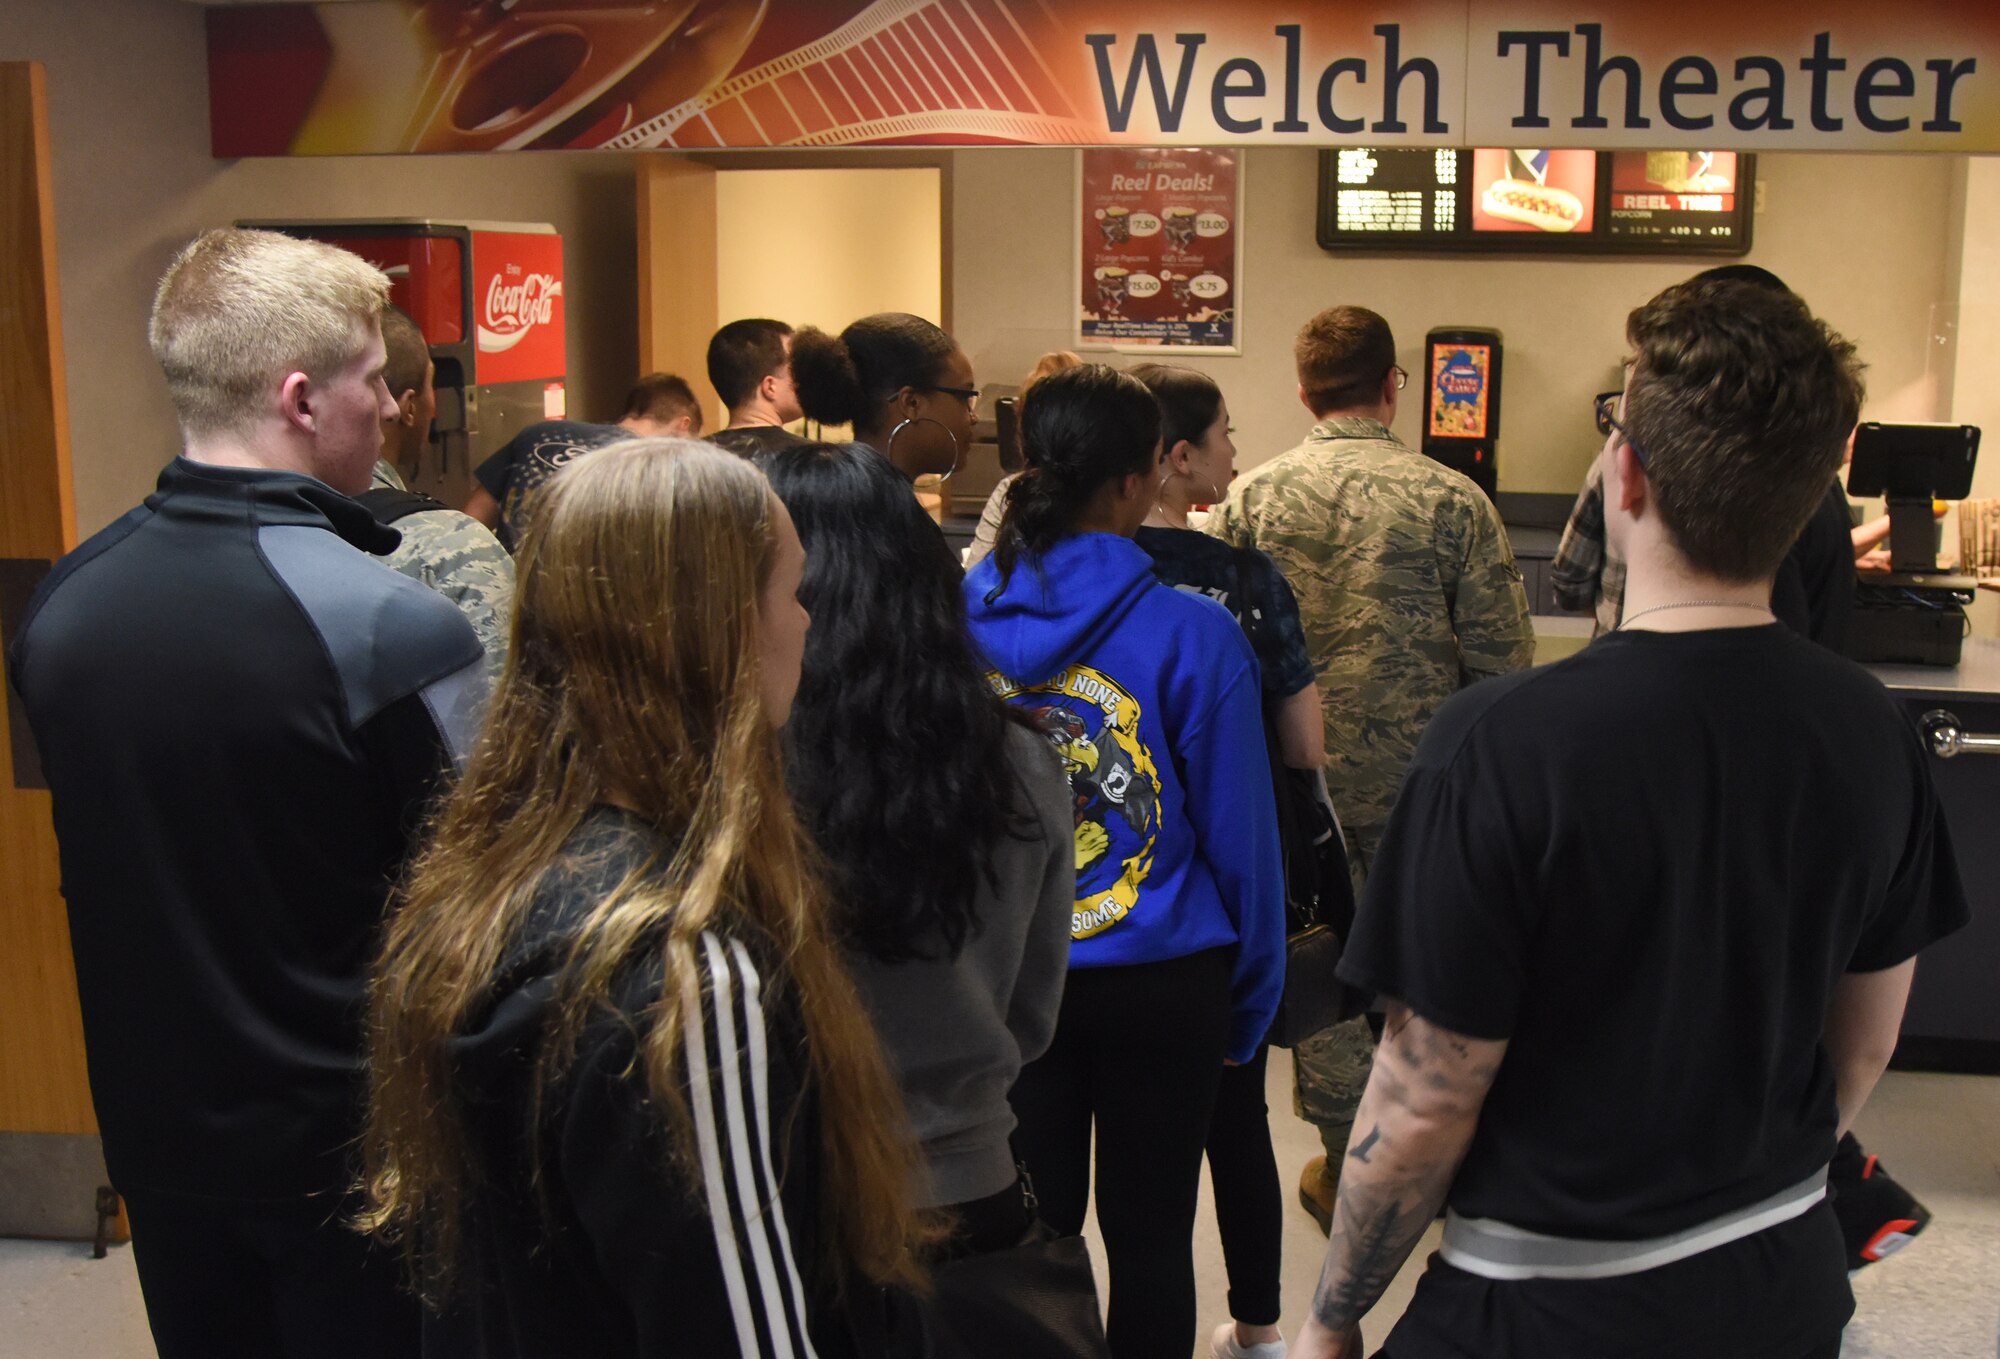 Airmen from the 81st Training Group stand in line for refreshments to watch the movie, 42, inside the Welch Theater at Keesler Air Force Base, Mississippi, Feb. 21, 2019. The movie, a story of Jackie Robinson's rise to fame in Major League Baseball, was shown in celebration for Black History Month. Keesler hosted several events throughout the month to include a 5K run, luncheon, movies and will conclude with a close-out celebration Feb. 28. The events are meant to help Keesler personnel to remember, educate and celebrate black history. (U.S. Air Force photo by Kemberly Groue)